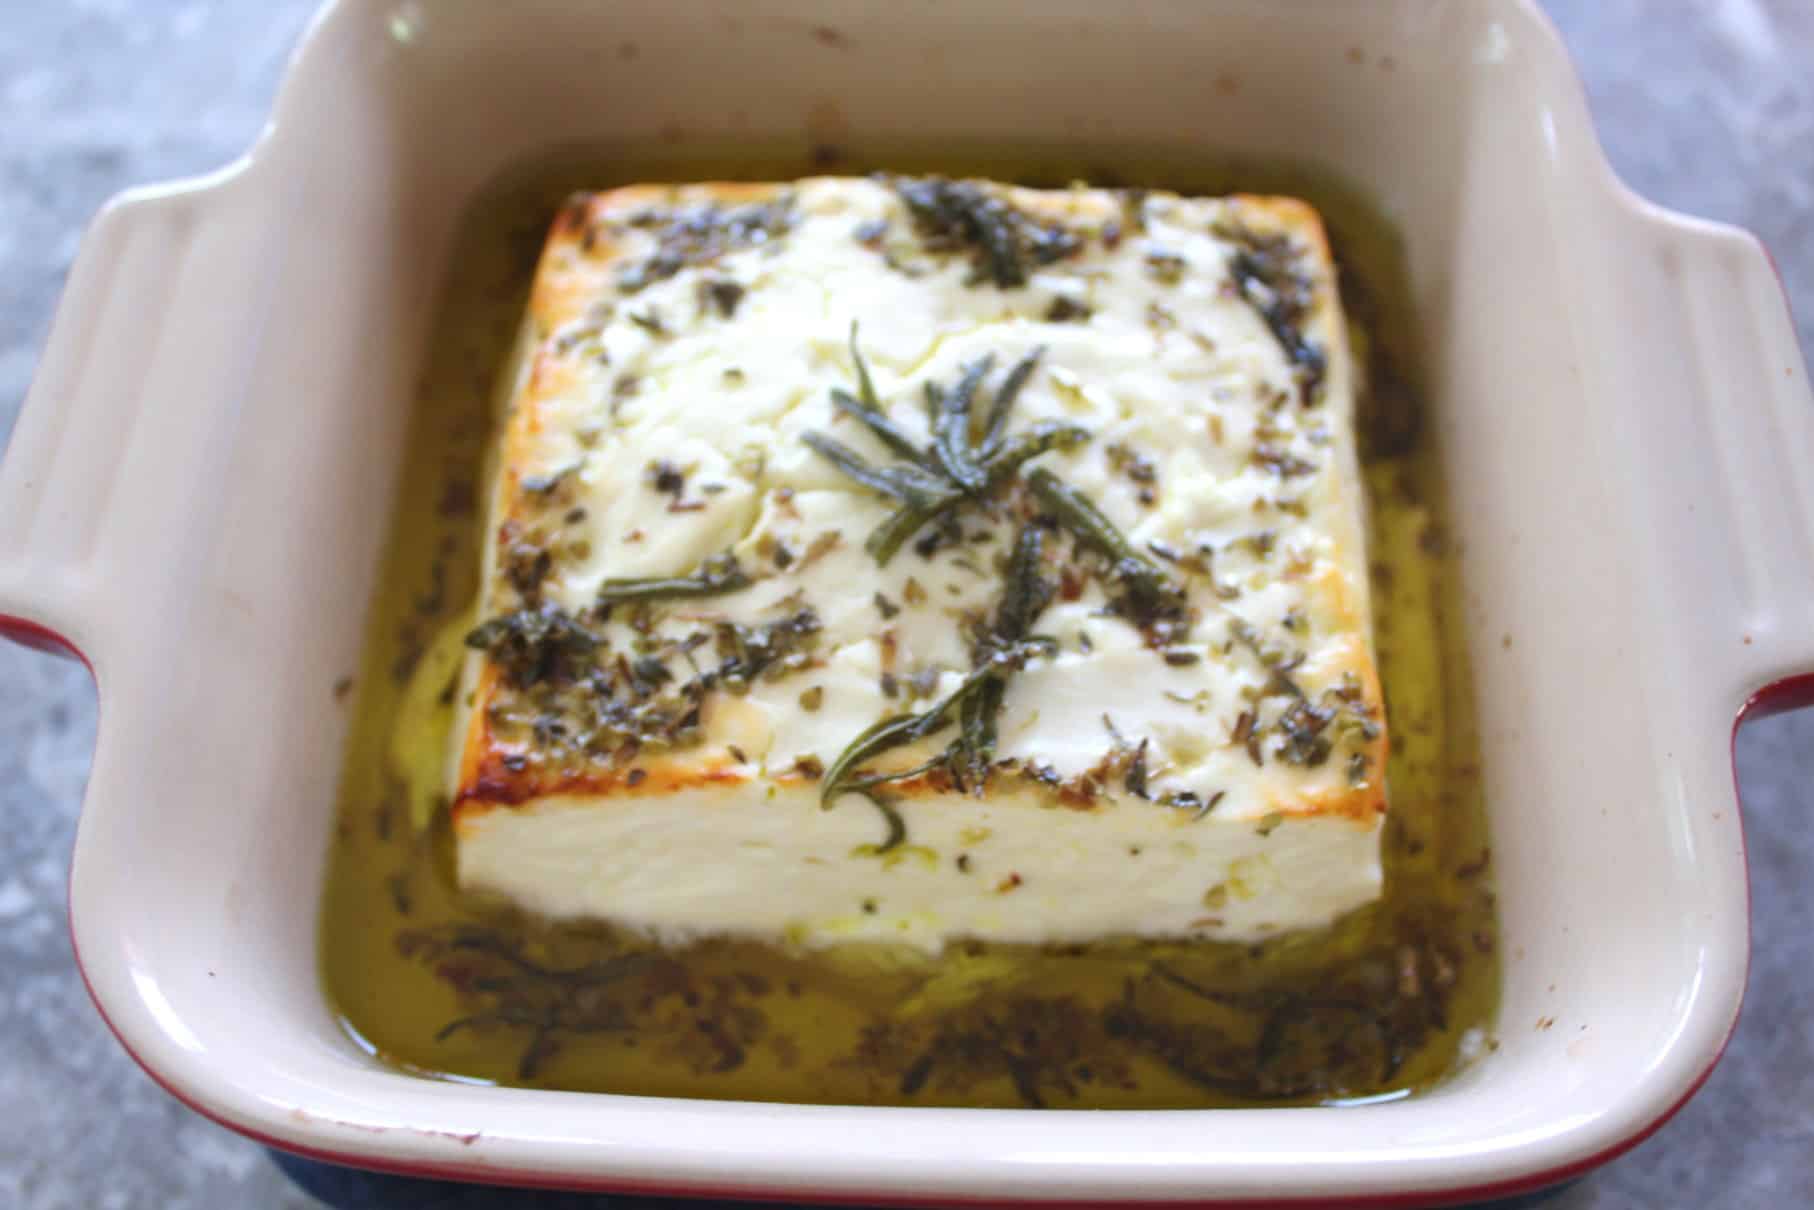 A baking dish showing a freshly baked block of feta cheese in olive oil and covered in herbs.